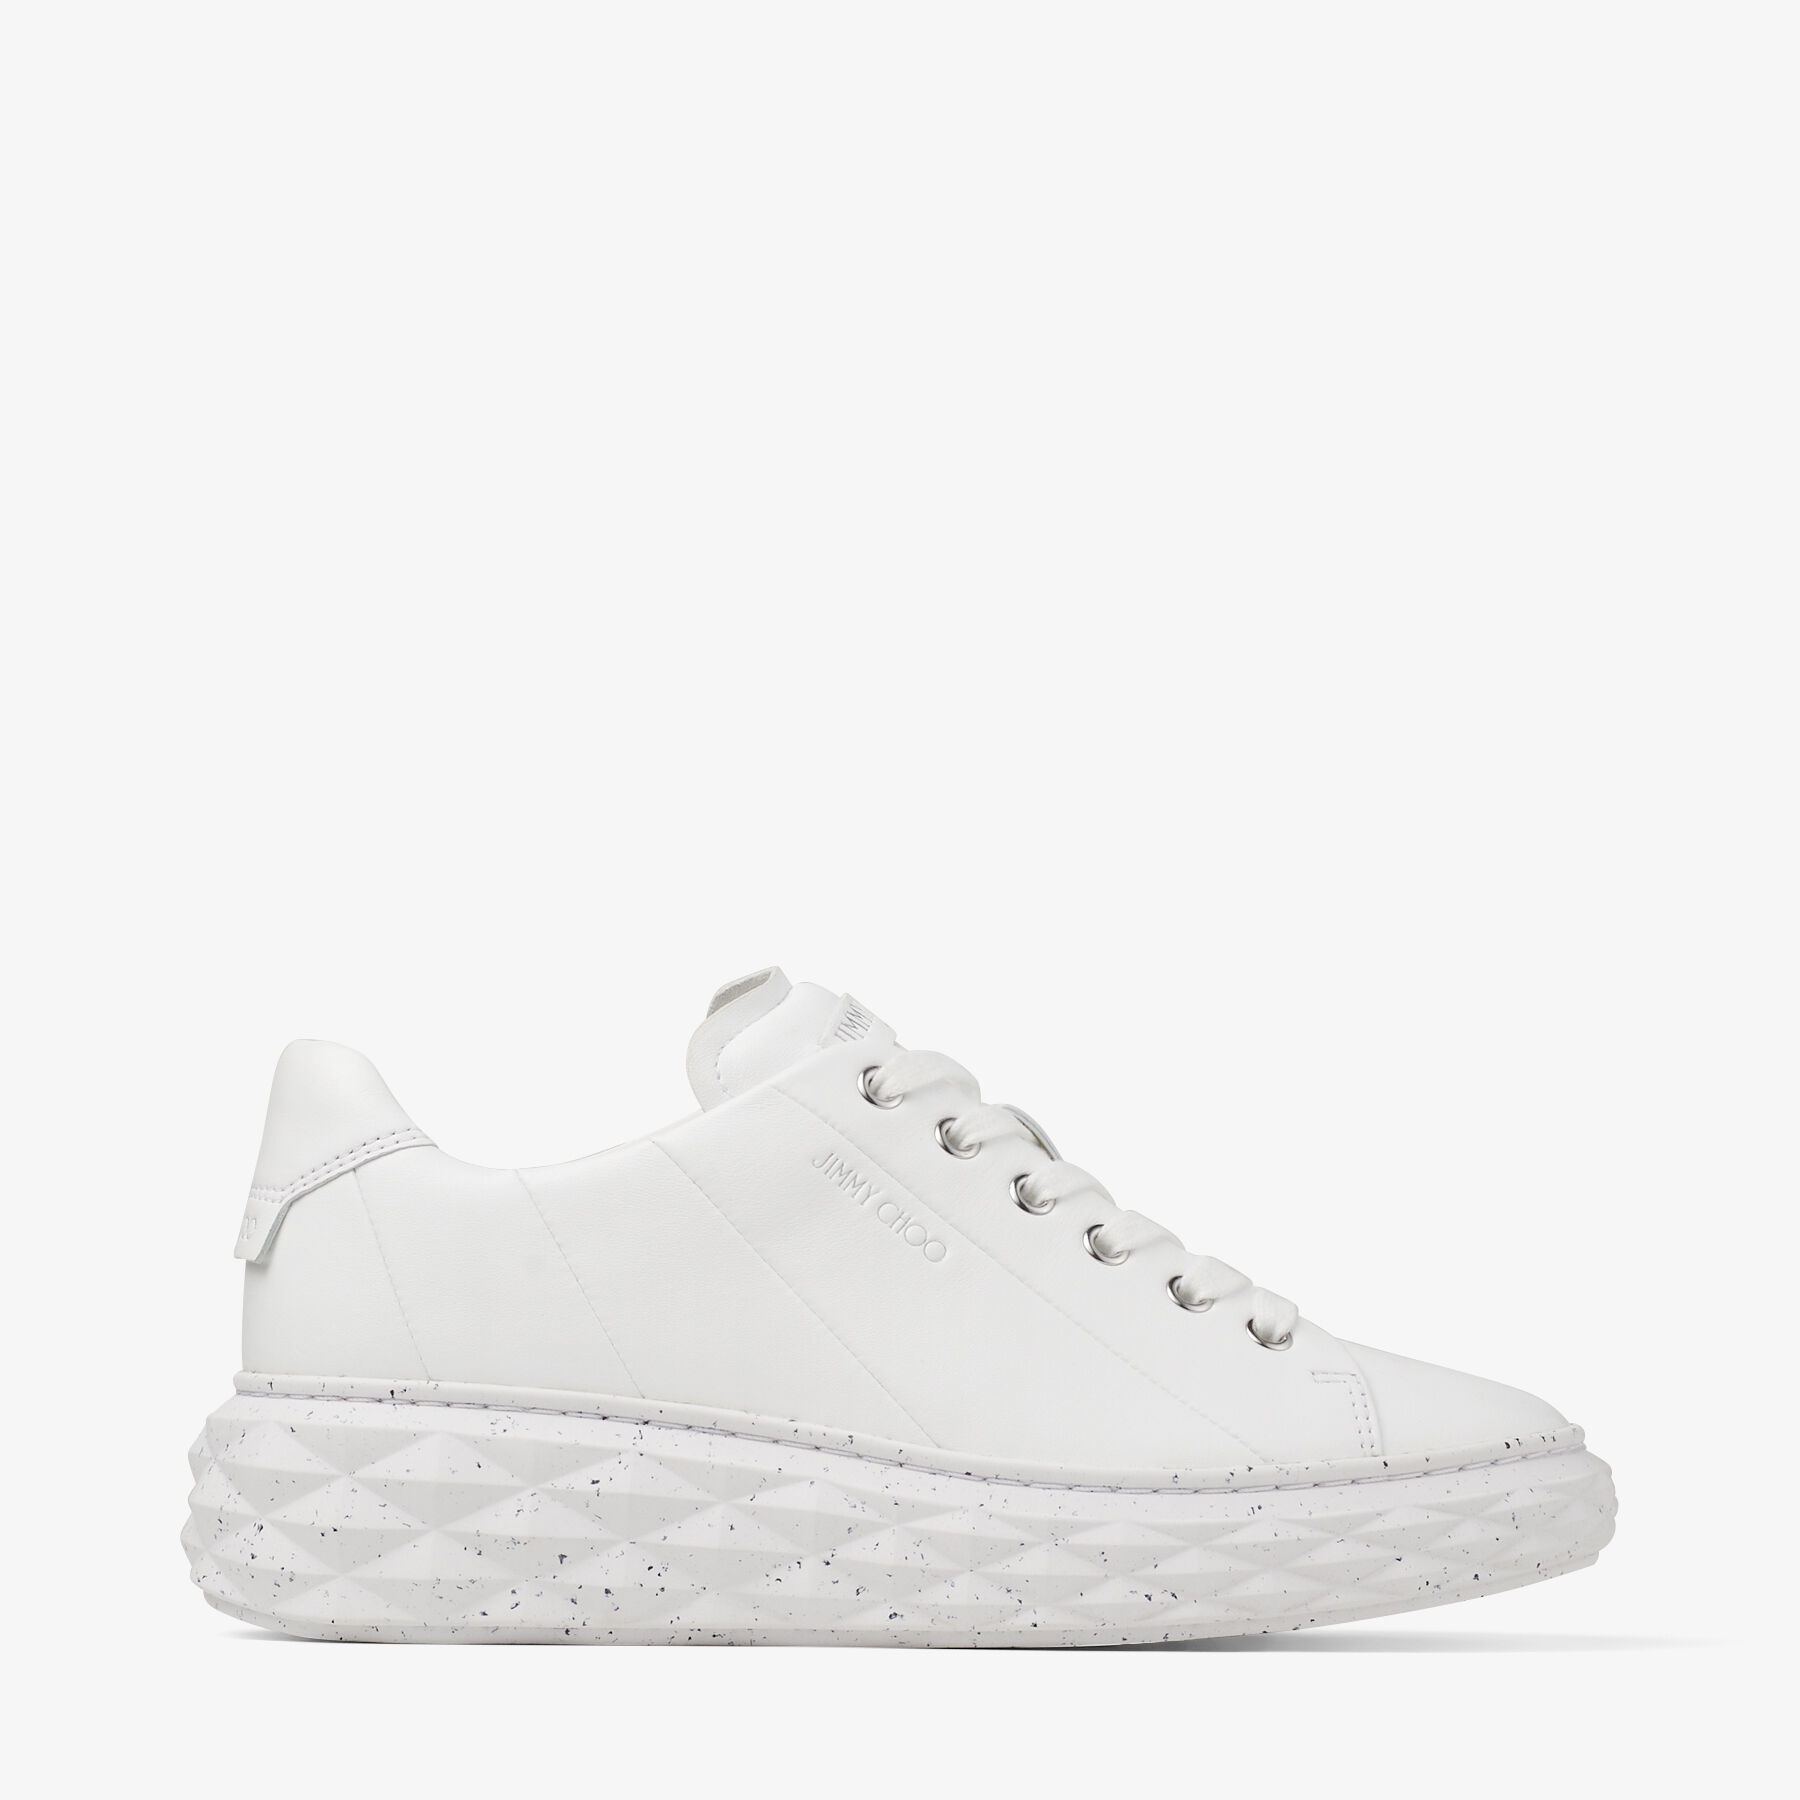 Diamond Light Maxi/F
White Nappa Leather Low-Top Trainers with Platform Sole - 1